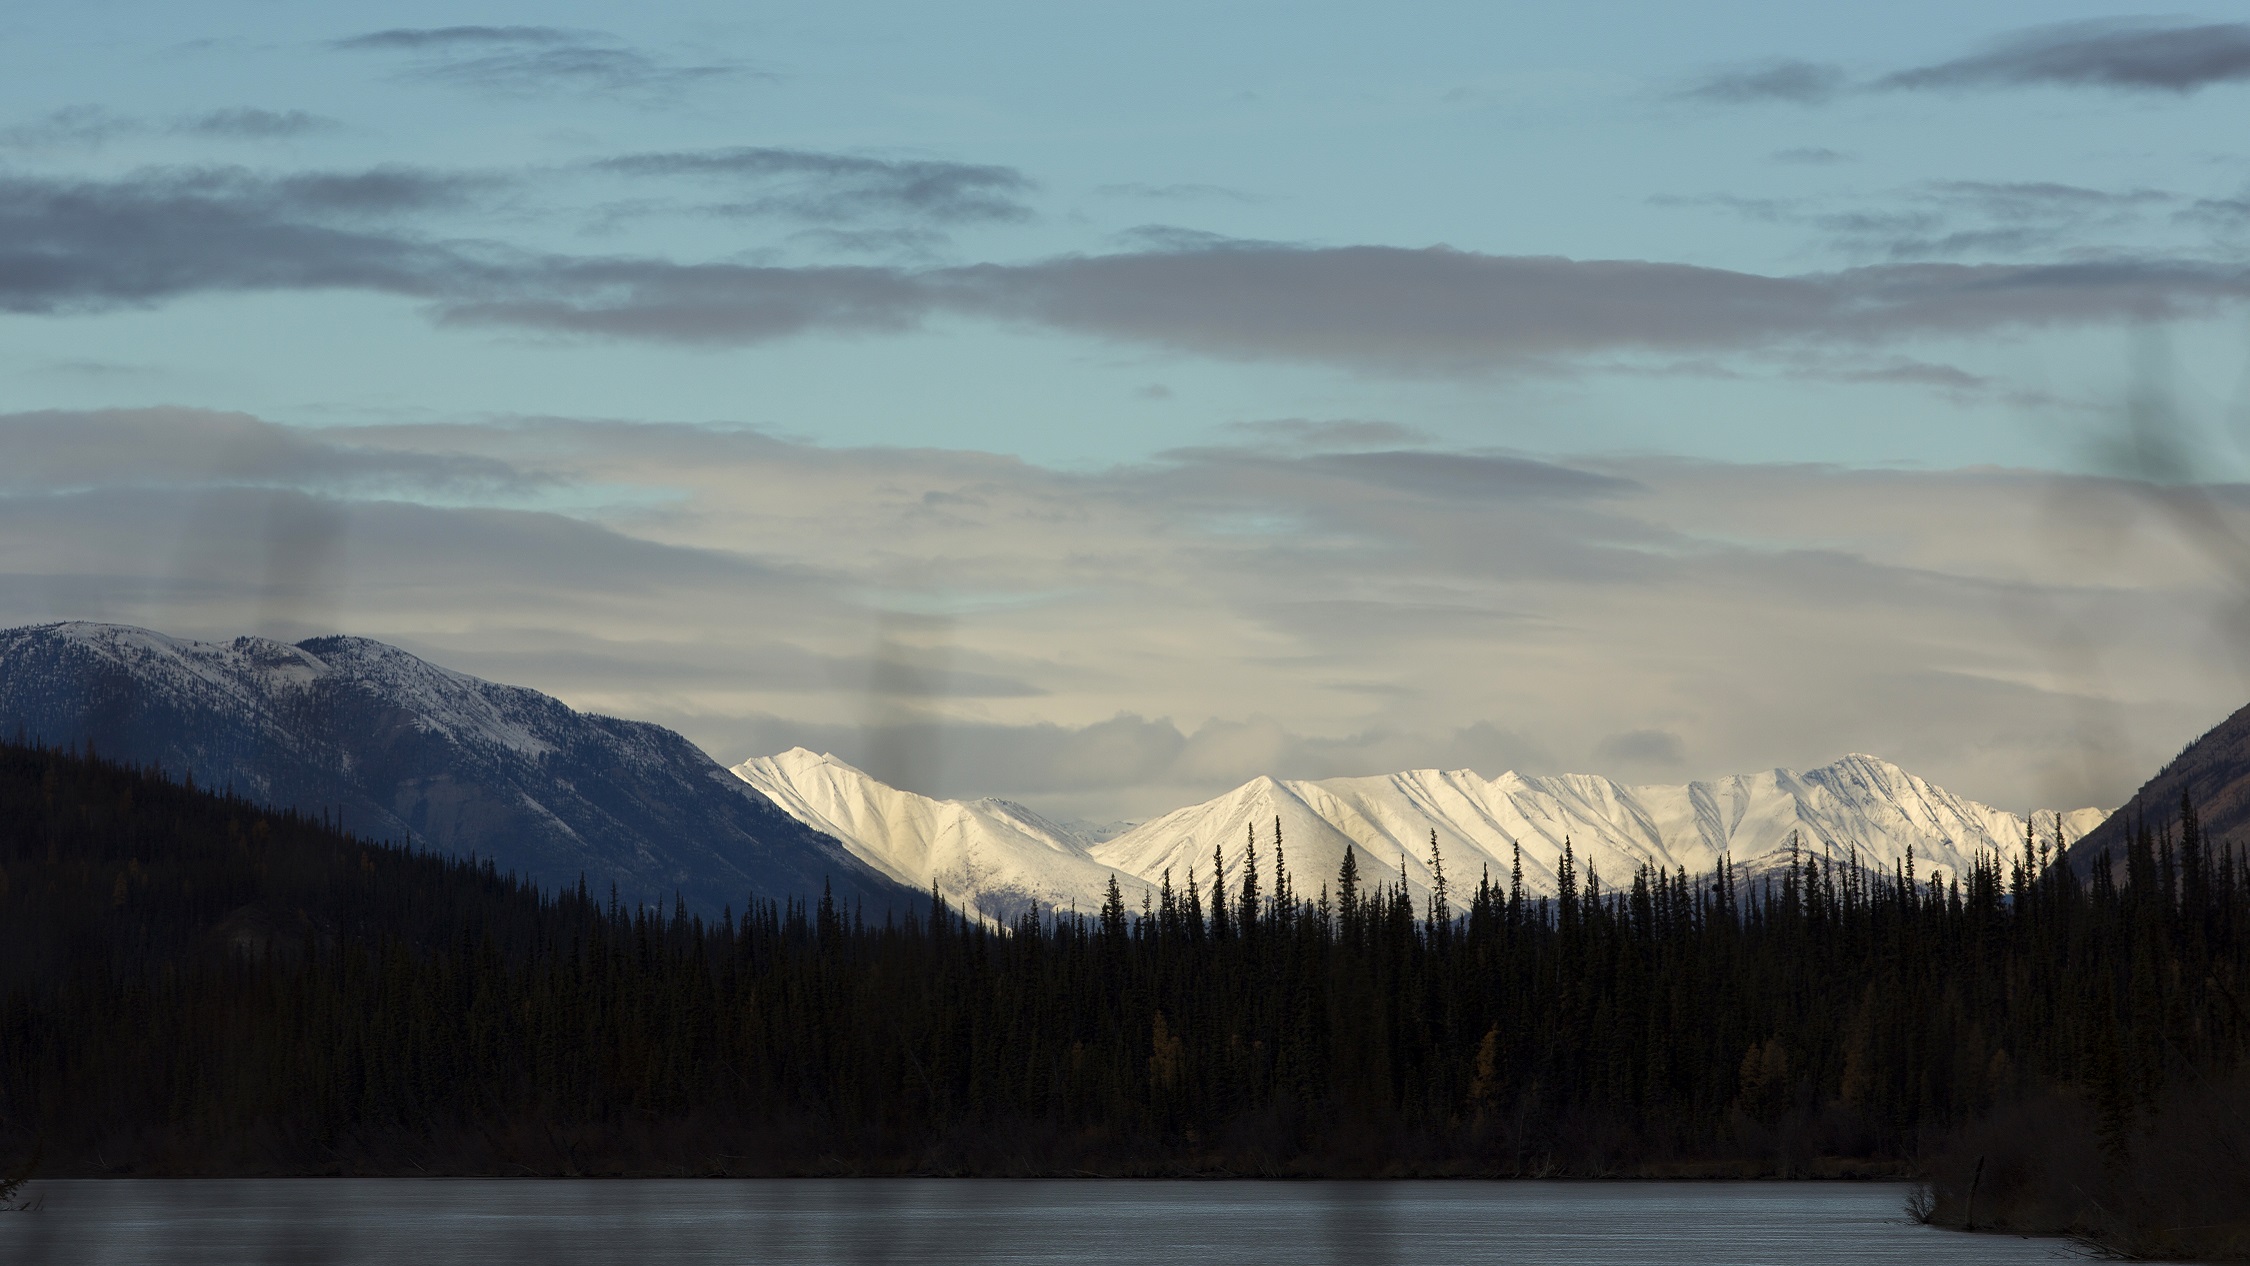 The Mackenzie Mountains loom above trees lining the 335-mile-long South Nahanni River